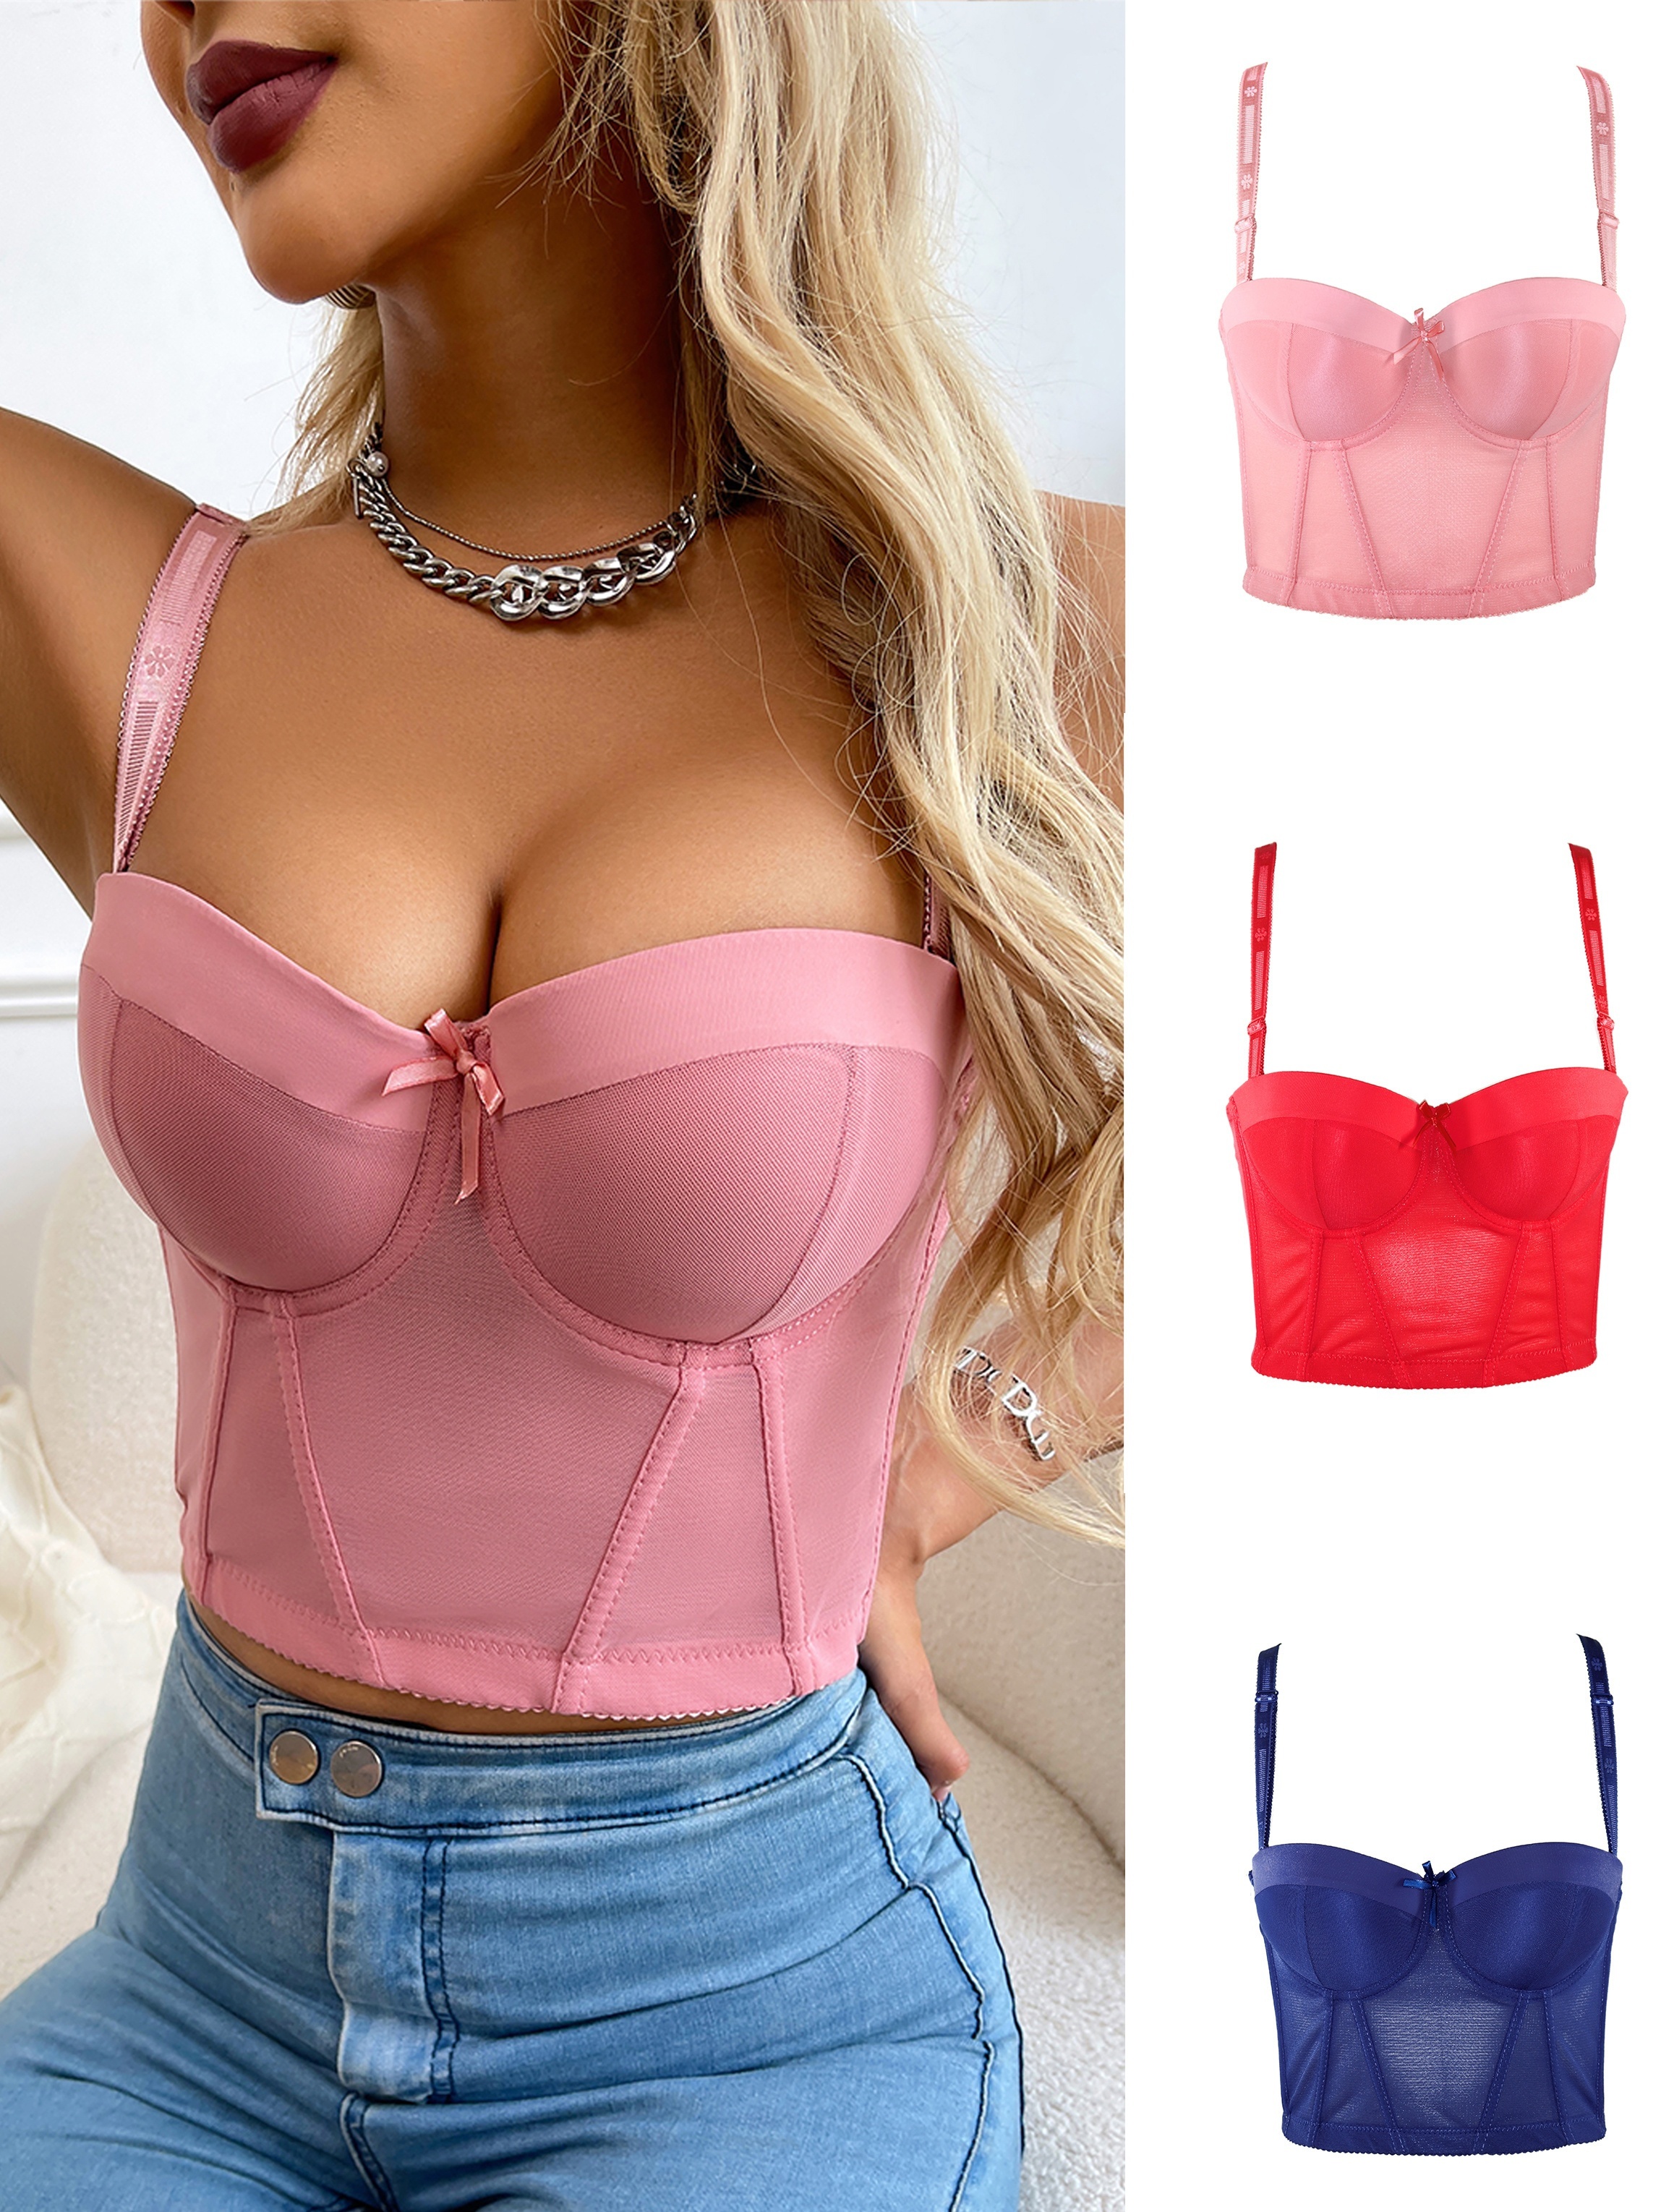 Add One Cup Push Up Bra Underwire Corset Top Bustier